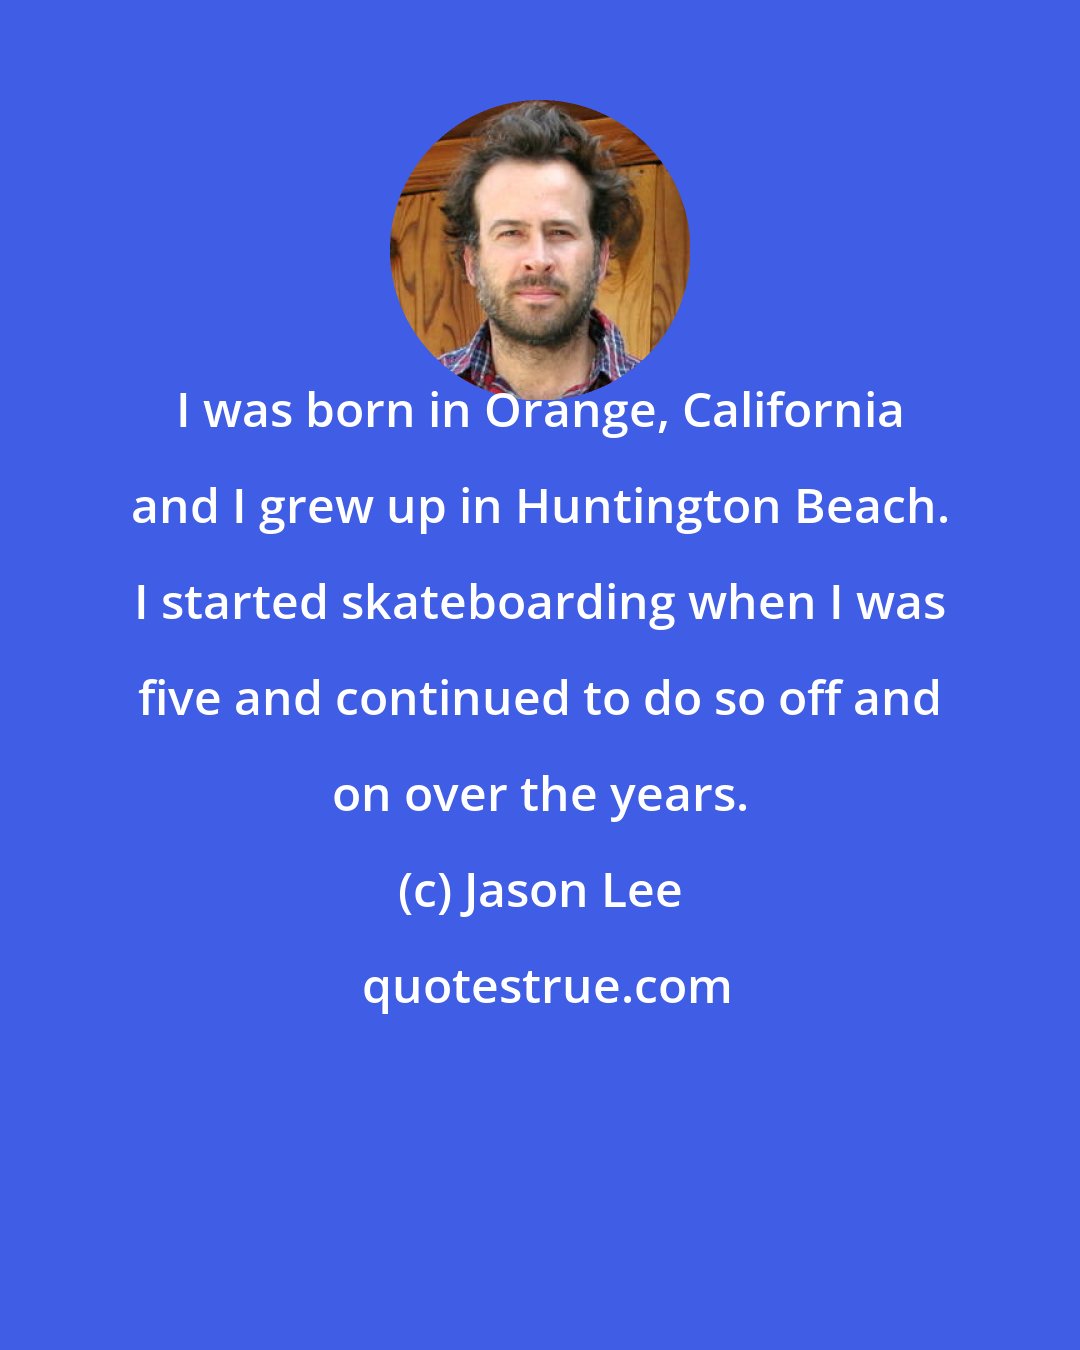 Jason Lee: I was born in Orange, California and I grew up in Huntington Beach. I started skateboarding when I was five and continued to do so off and on over the years.